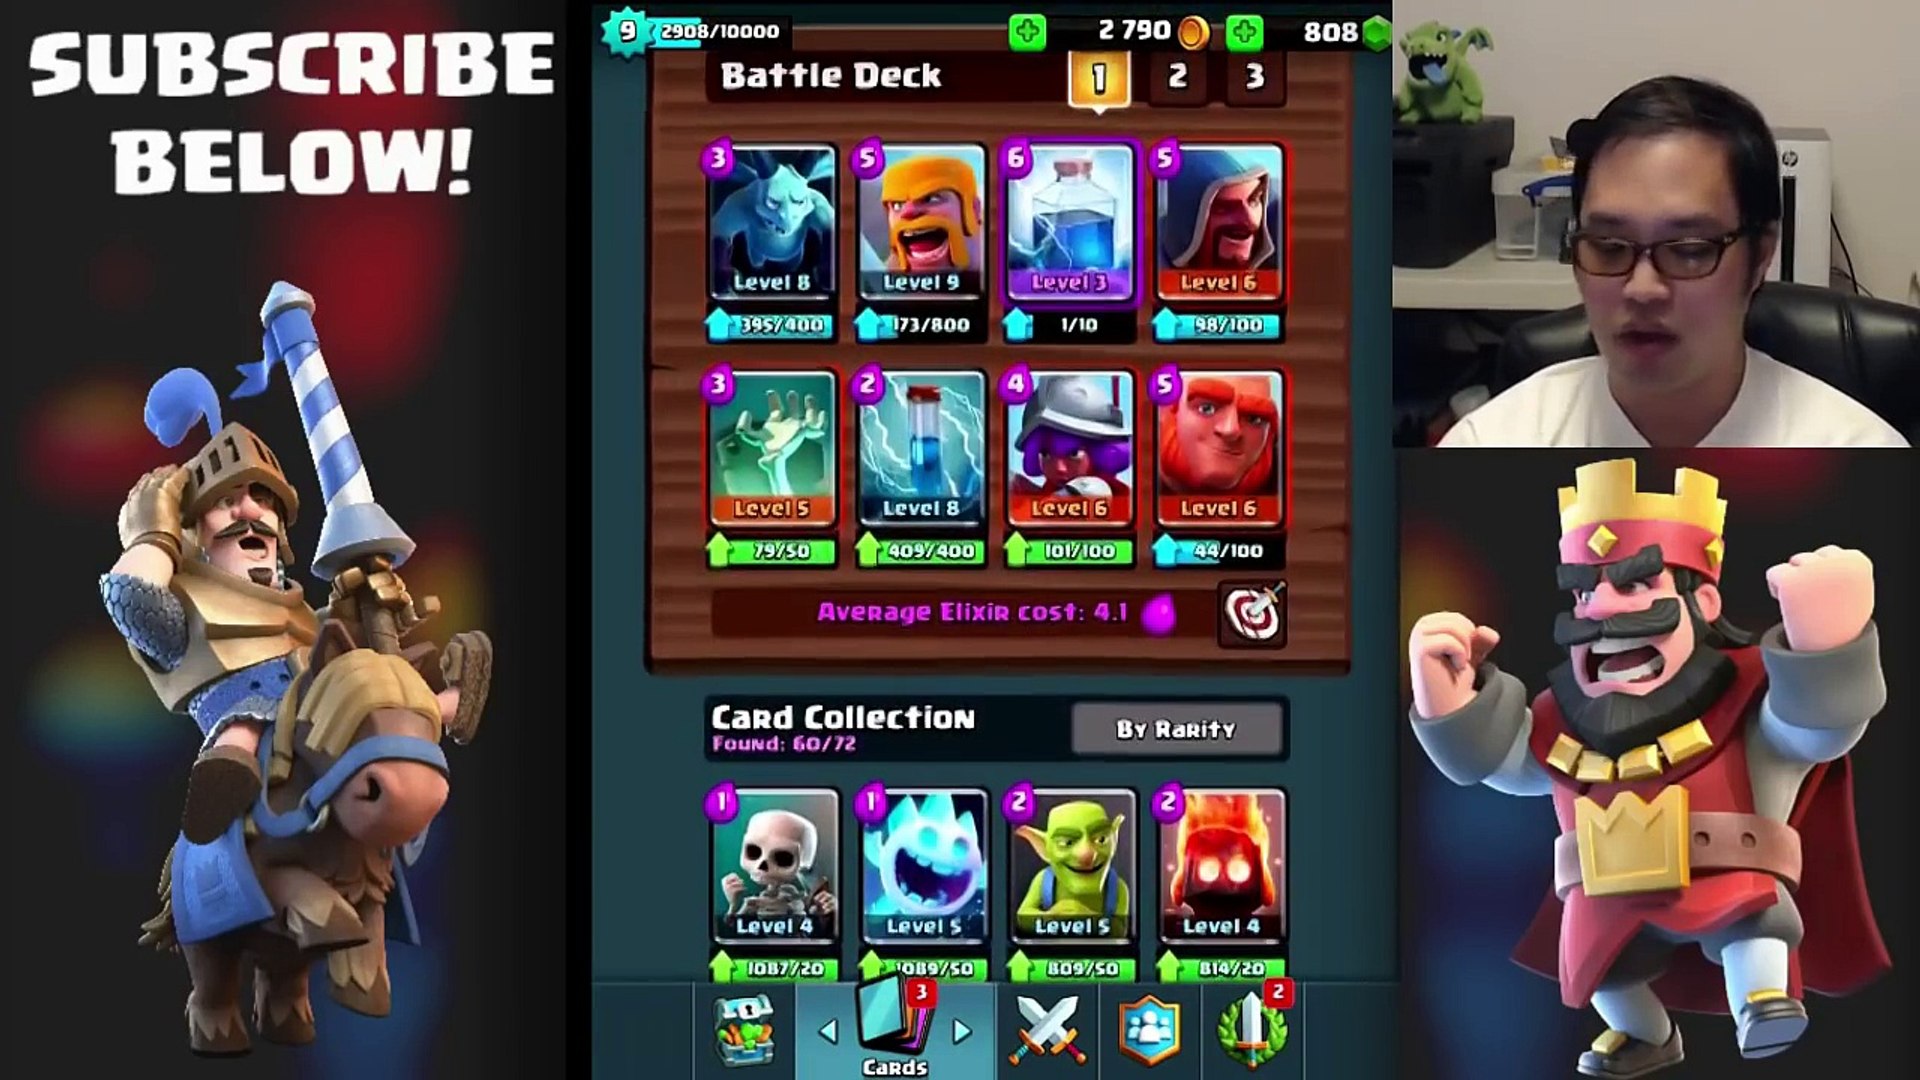 Clash Royale Best Deck For Arena 7 Arena 9 Decks Undefeated Best Attack Strategy Tips F2p Players Video Dailymotion